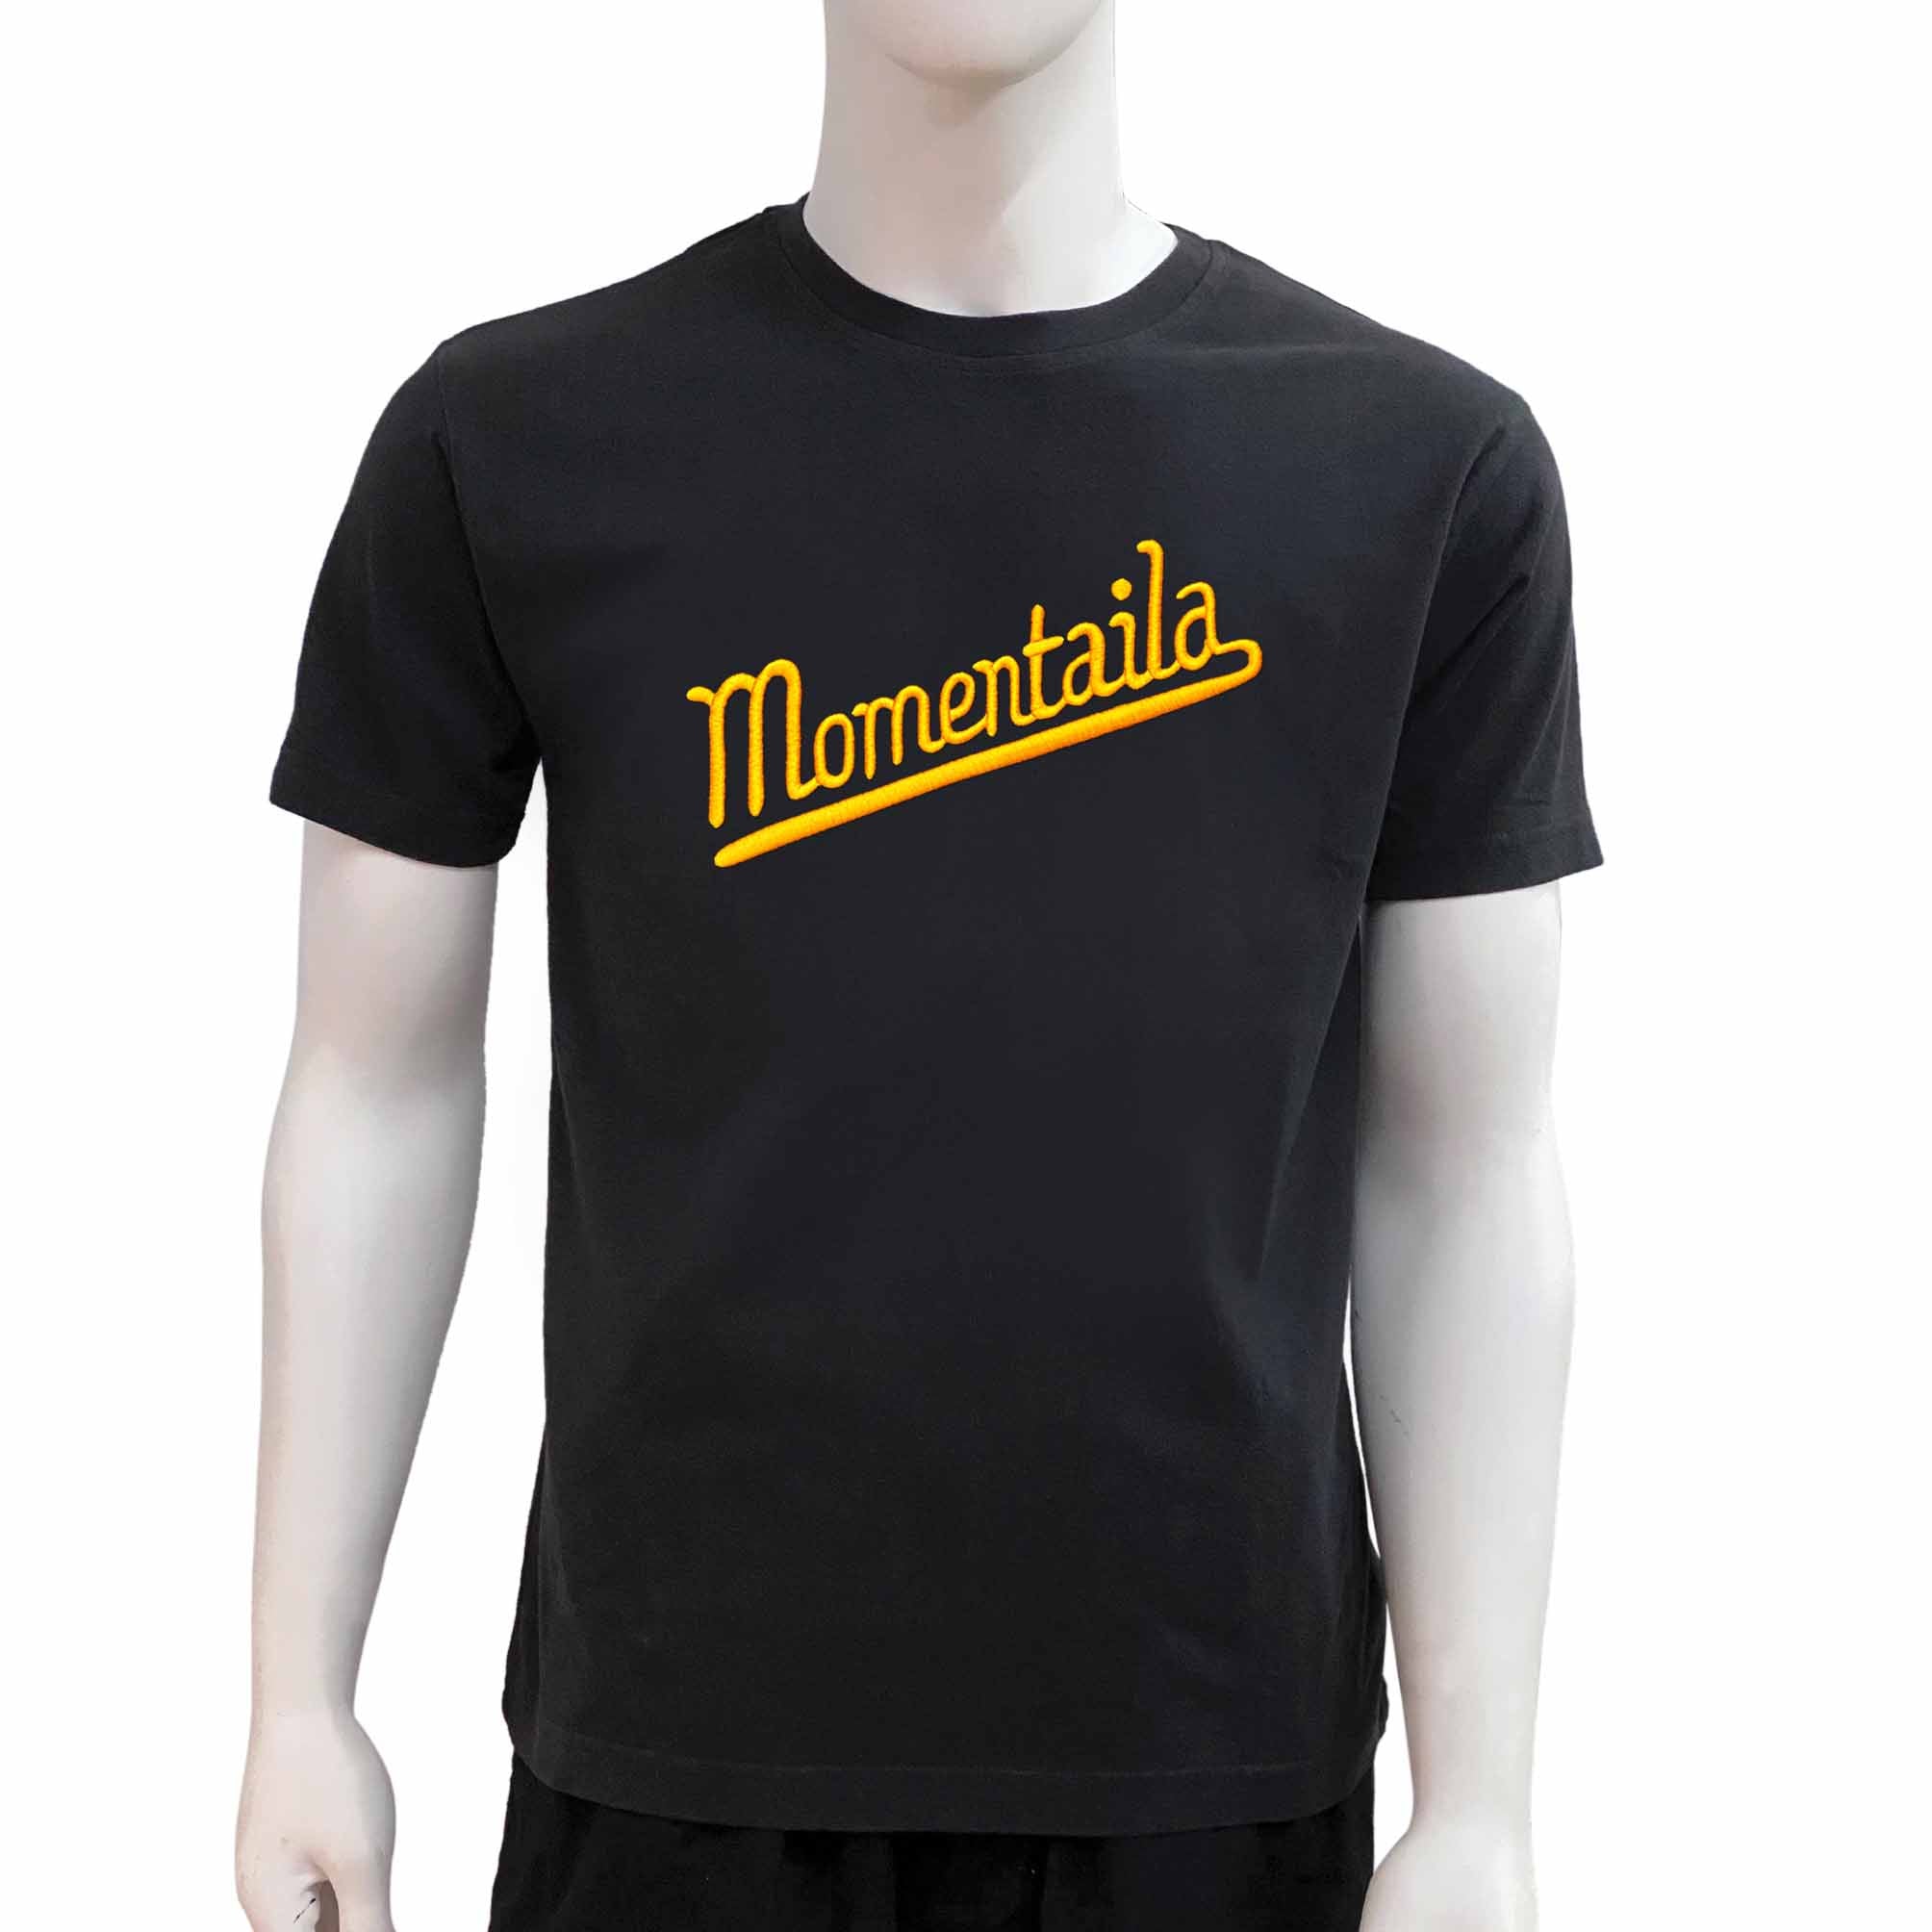 Momentaila Embroidered Tee, Black